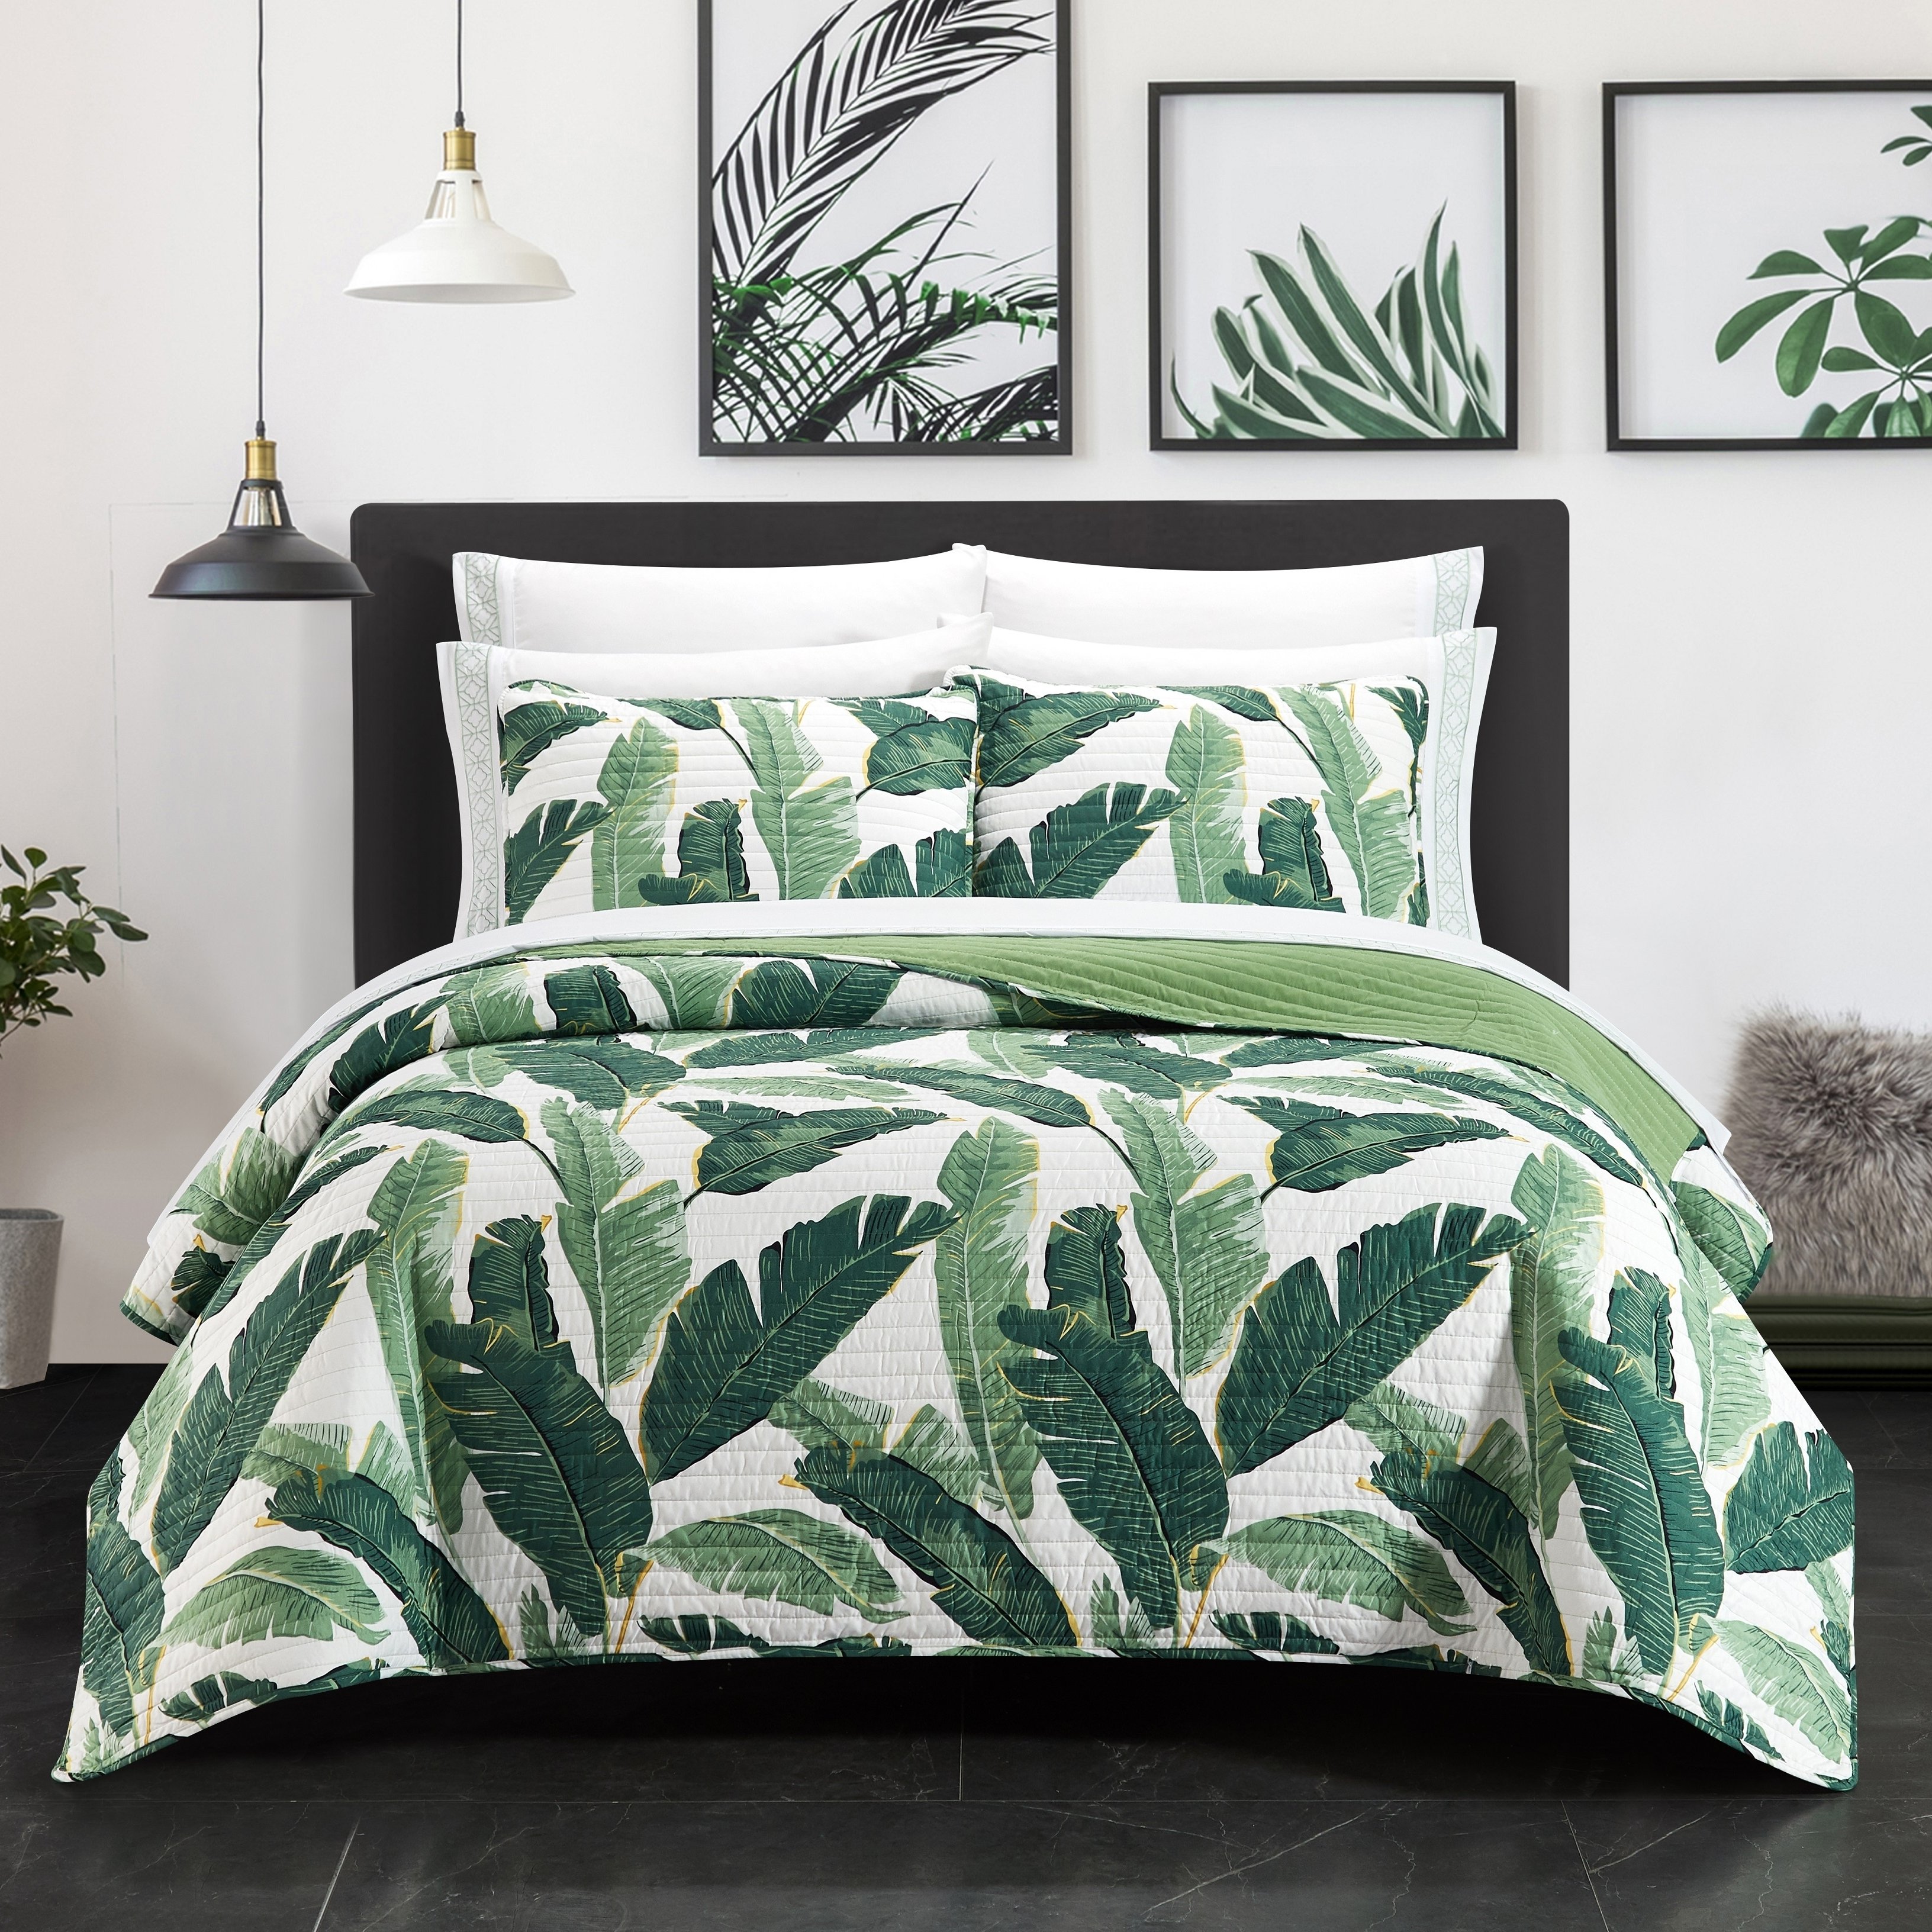 Palm Spring 9 Or 6 Piece Quilt Set Watercolor Floral Pattern Print Bed In A Bag - Green, King